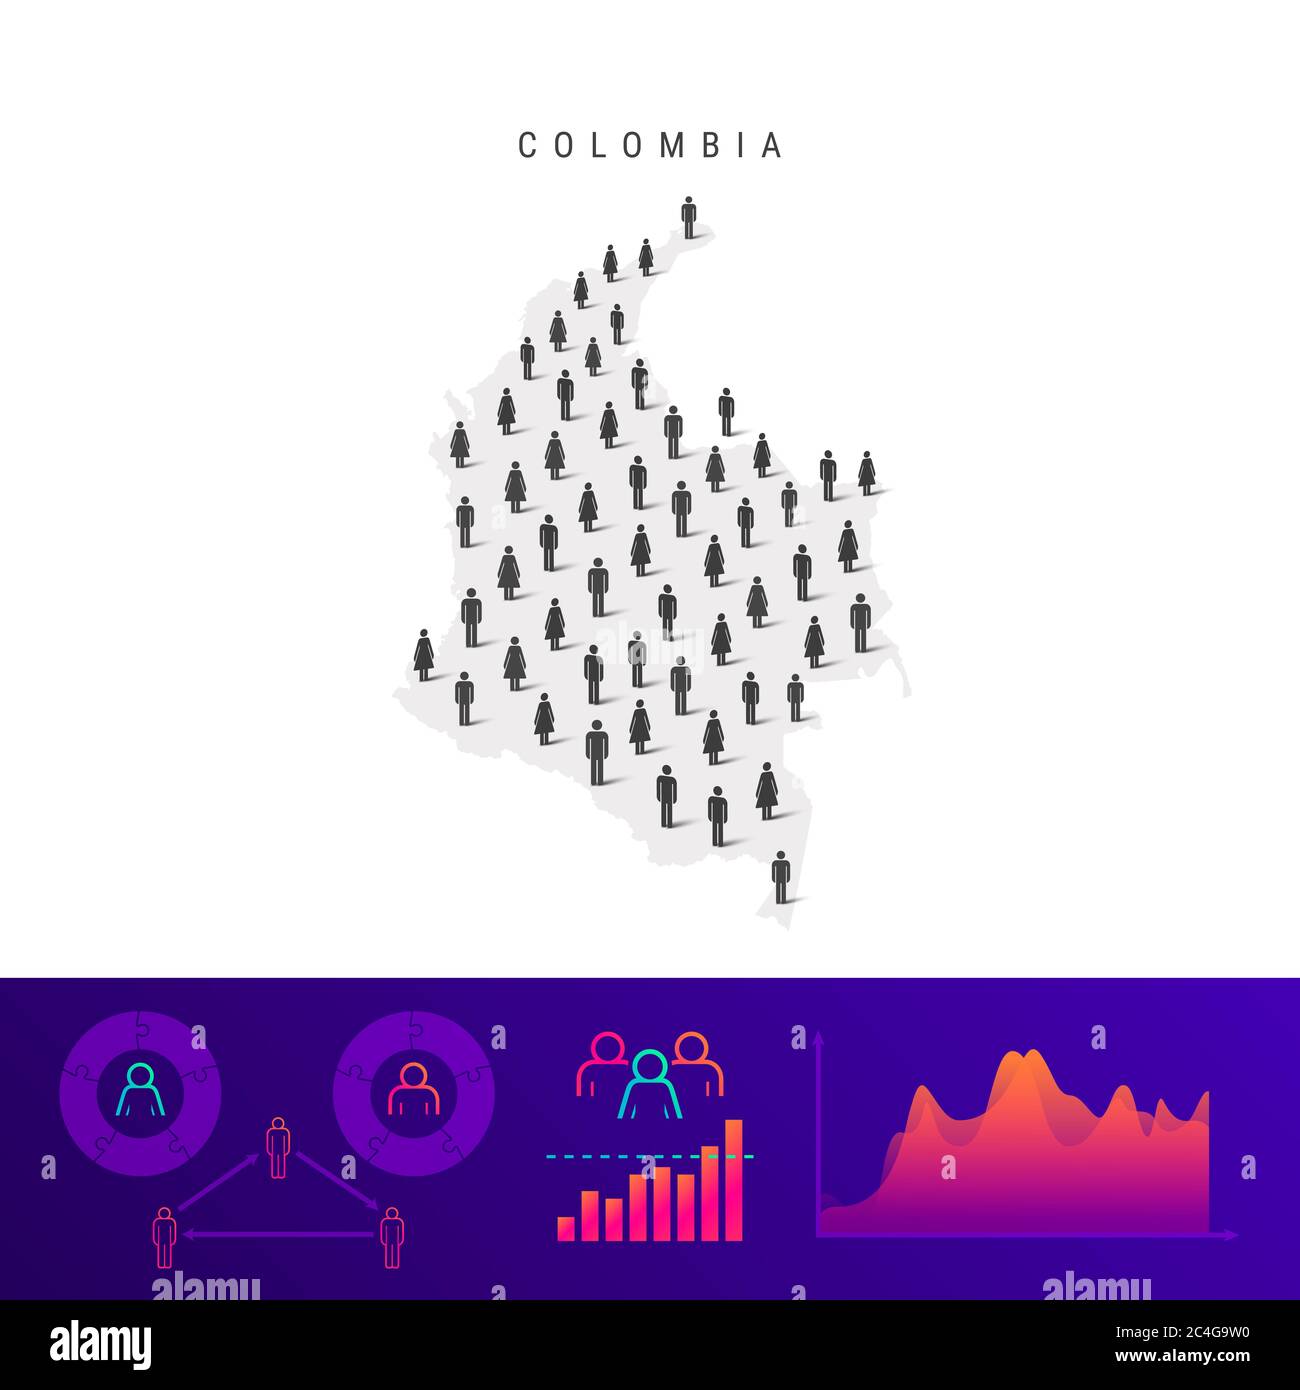 Colombian people icon map. Detailed silhouette. Mixed crowd of men and women. Population infographics. Isolated illustration. Stock Photo